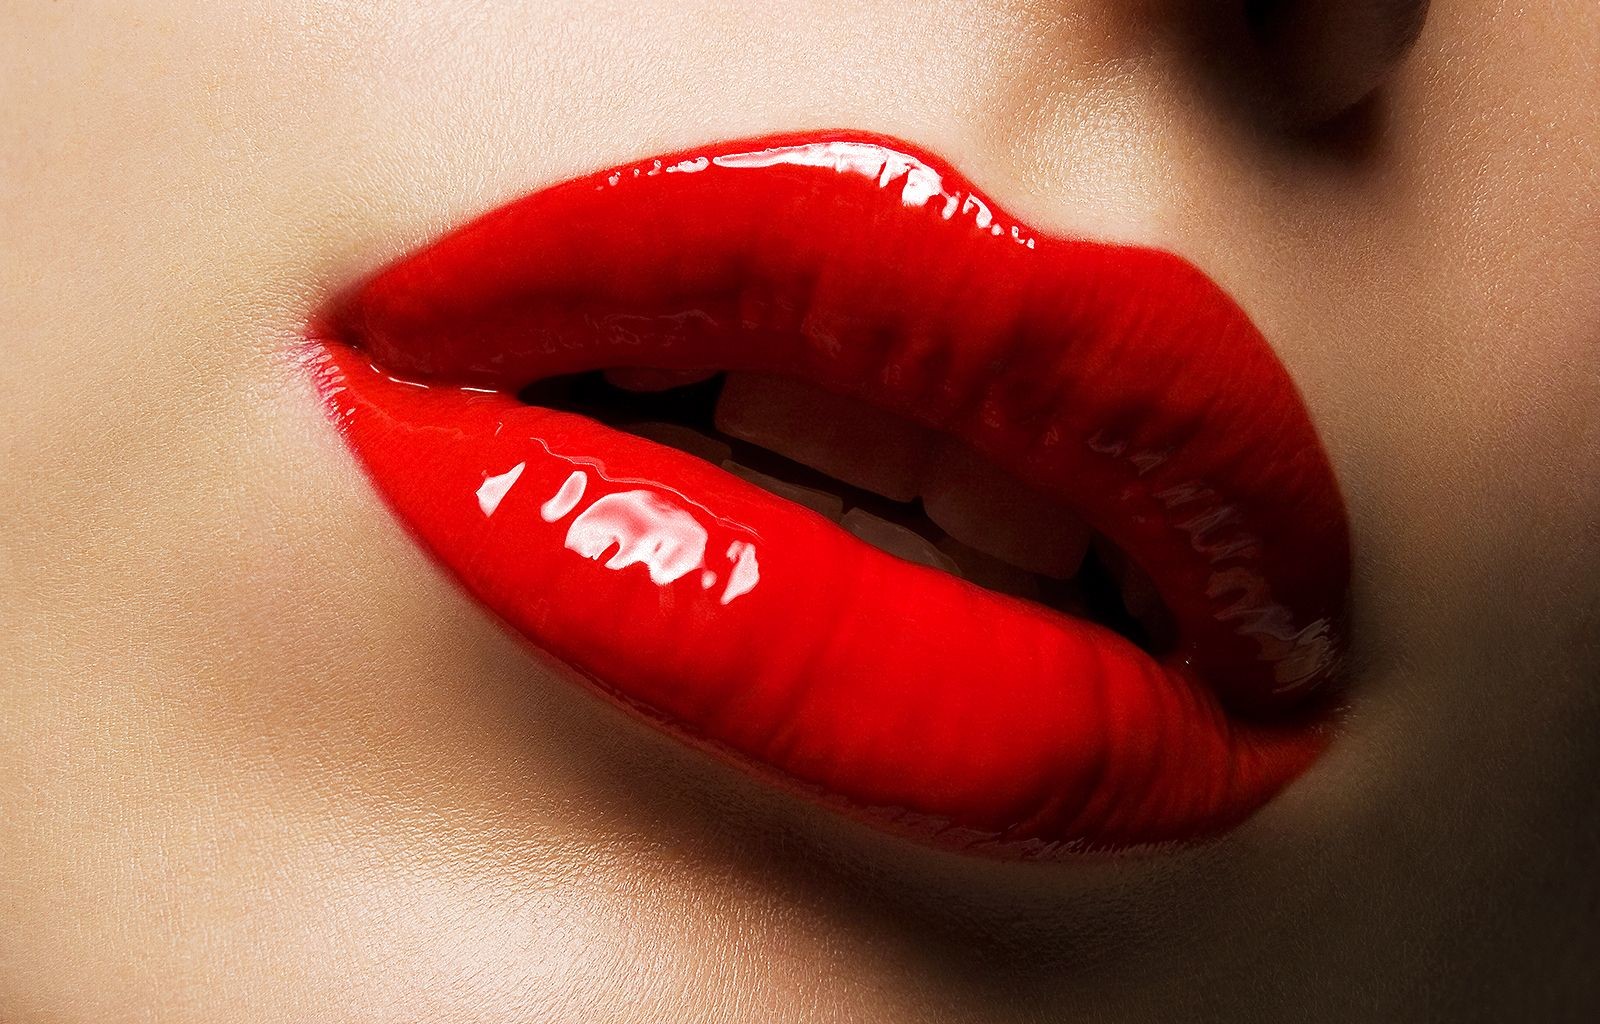 3. "The Best Lipstick Shades for Blonde Hair and Big Lips" - wide 2